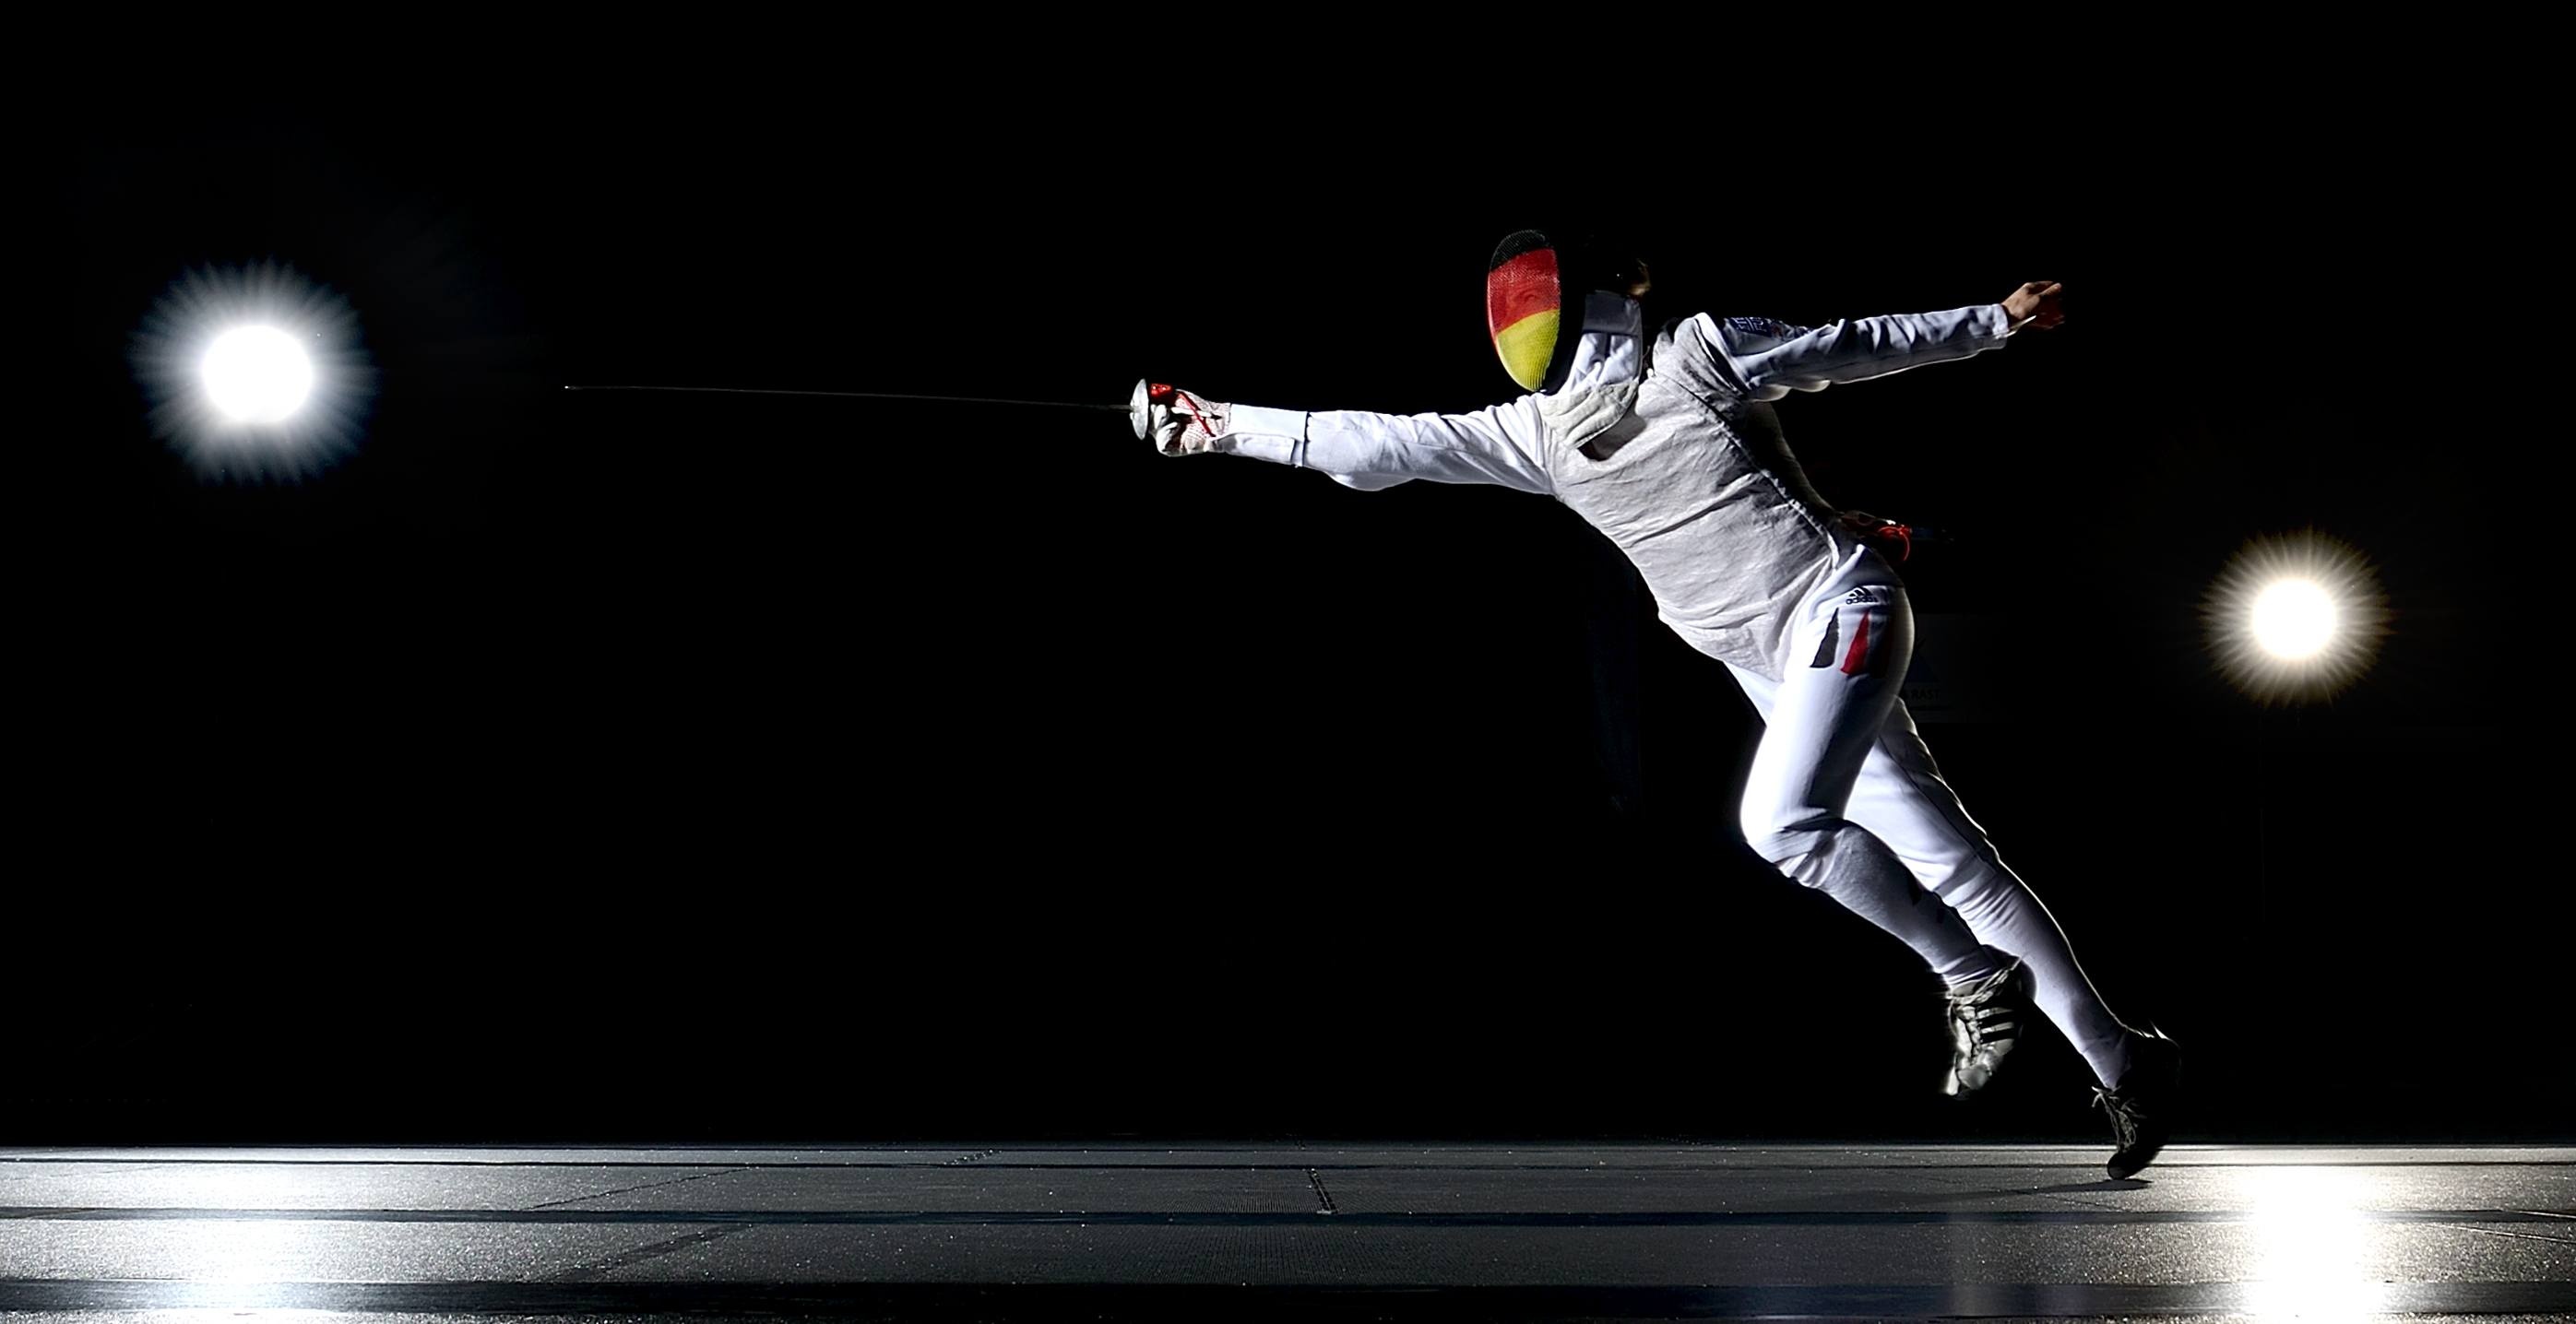 Fencing: Peter Joppich, A German foil fencer, A five-time World Champion. 2800x1440 HD Wallpaper.